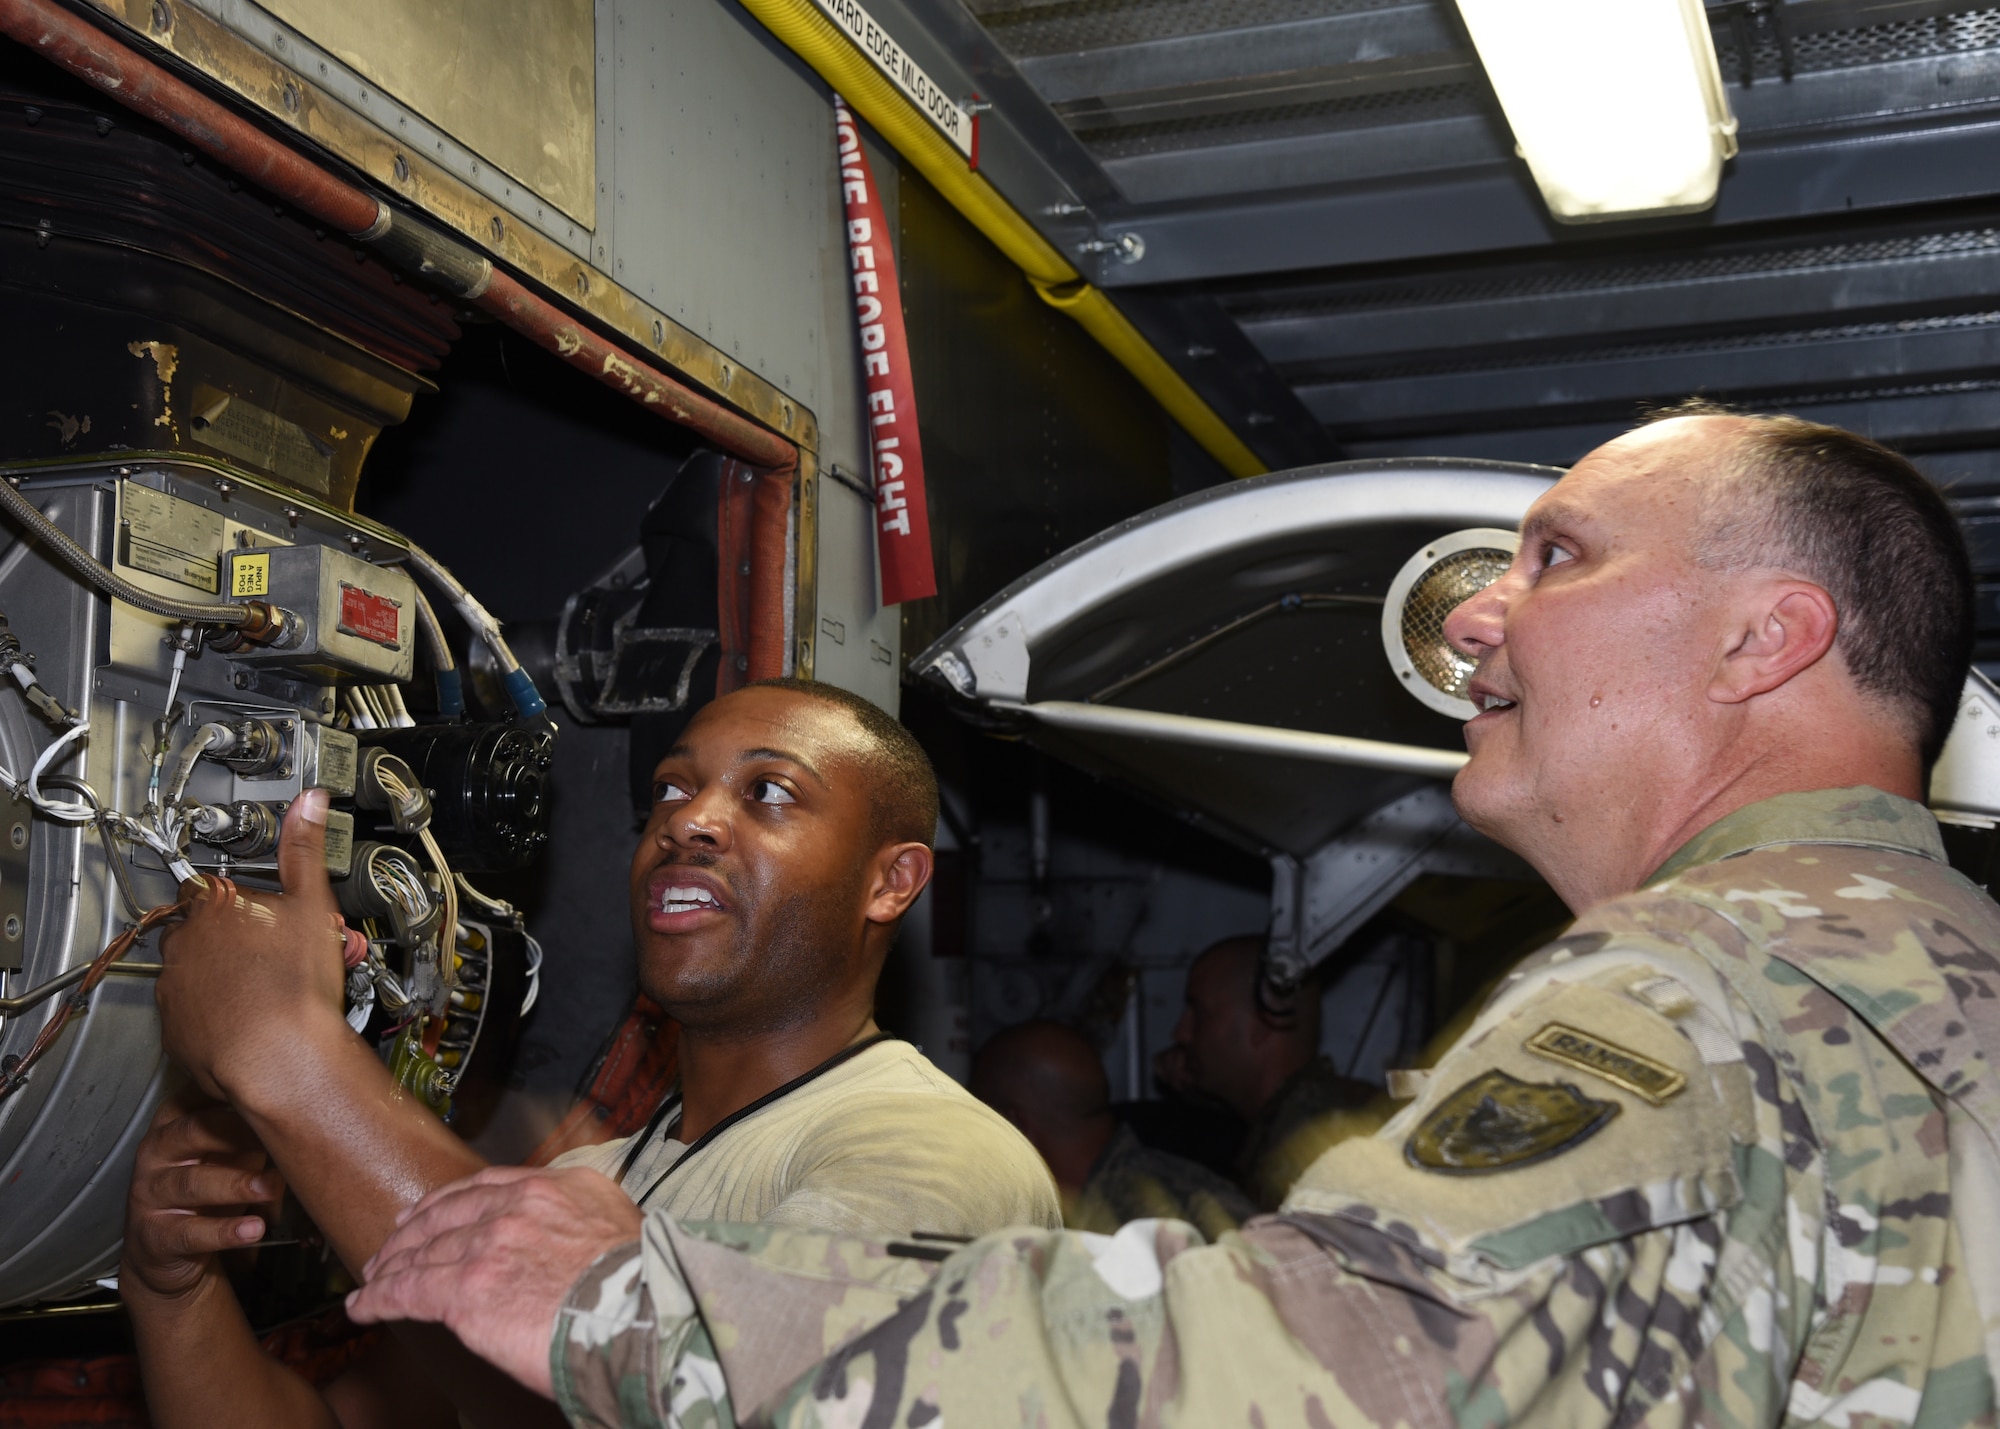 U.S. Army Maj. Gen. John E. Cardwell, Special Assistant to the Commander, North American Aerospace Command and U. S. Northern Command for Reserve Matters, visited the 403rd Wing at Keesler Air Force Base, Mississippi, Aug. 13, 2019. The general toured a WC-130J Super Hercules aircraft, which was undergoing a routine inspection, and was also briefed on the job duties of the 403rd Aircraft Maintenance Squadron isochronal inspection dock by Staff Sgt. Robert Ricks, 403rd AMXS aerospace propulsion journeyman. Cardwell was also briefed on the different missions of the 403rd Wing. (U.S. Air Force photo by Jessica L. Kendziorek)